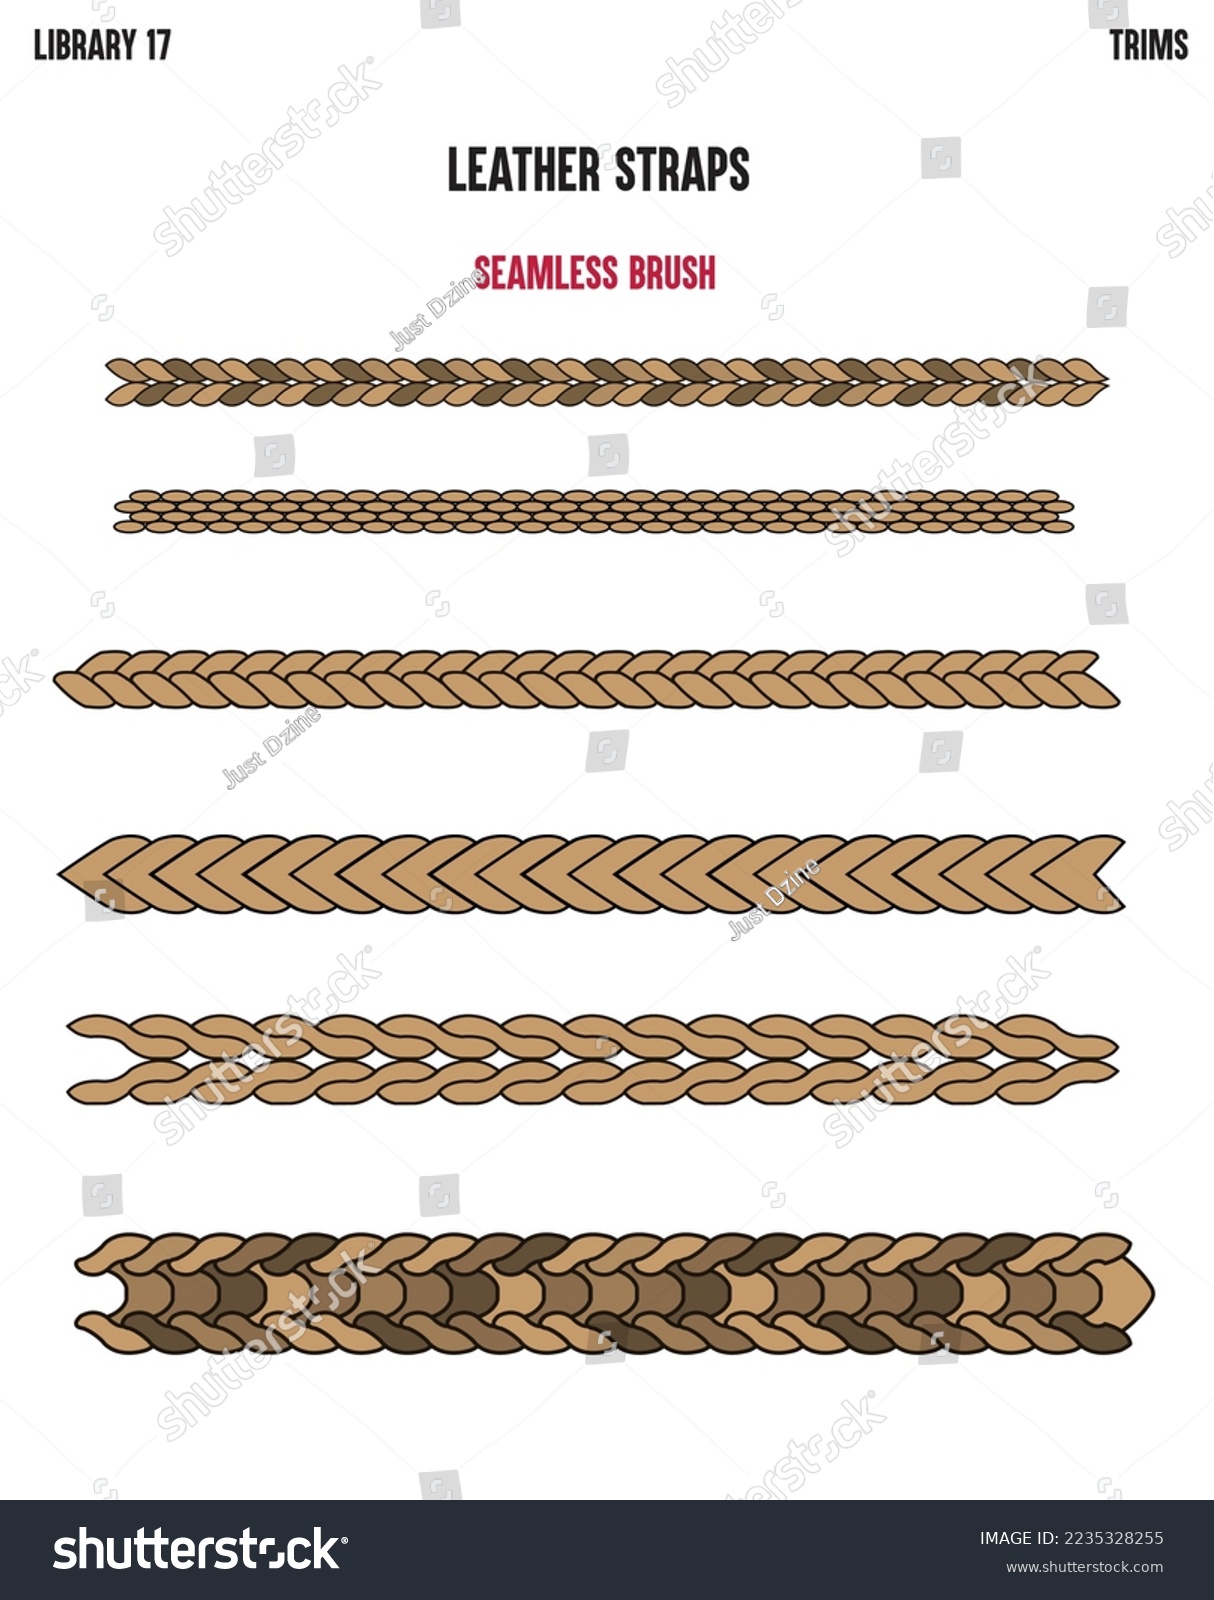 SVG of LEATHER BRAIDED STRAP ACCESSORIES VECTOR SKETCH svg